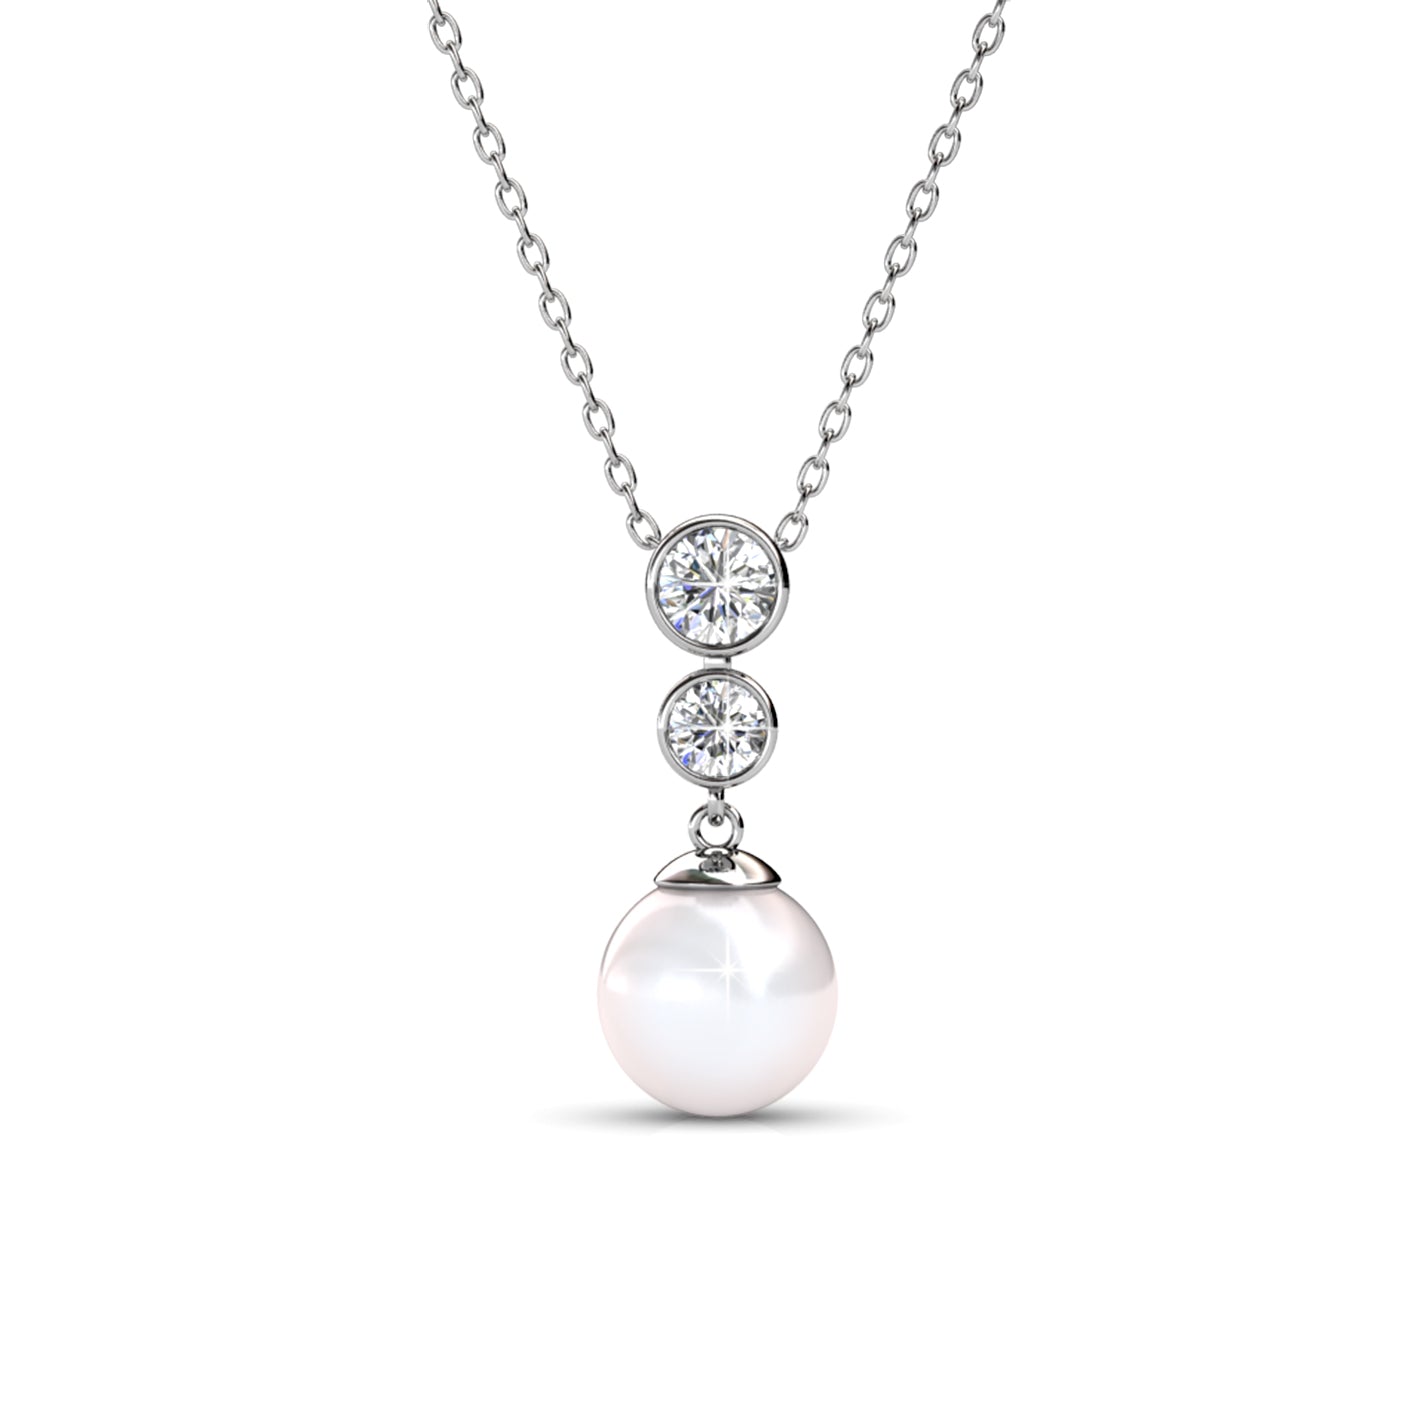 Genevieve "Sweet Pearl" 18k White Gold Plated Pendant Necklace with Swarovski Crystals